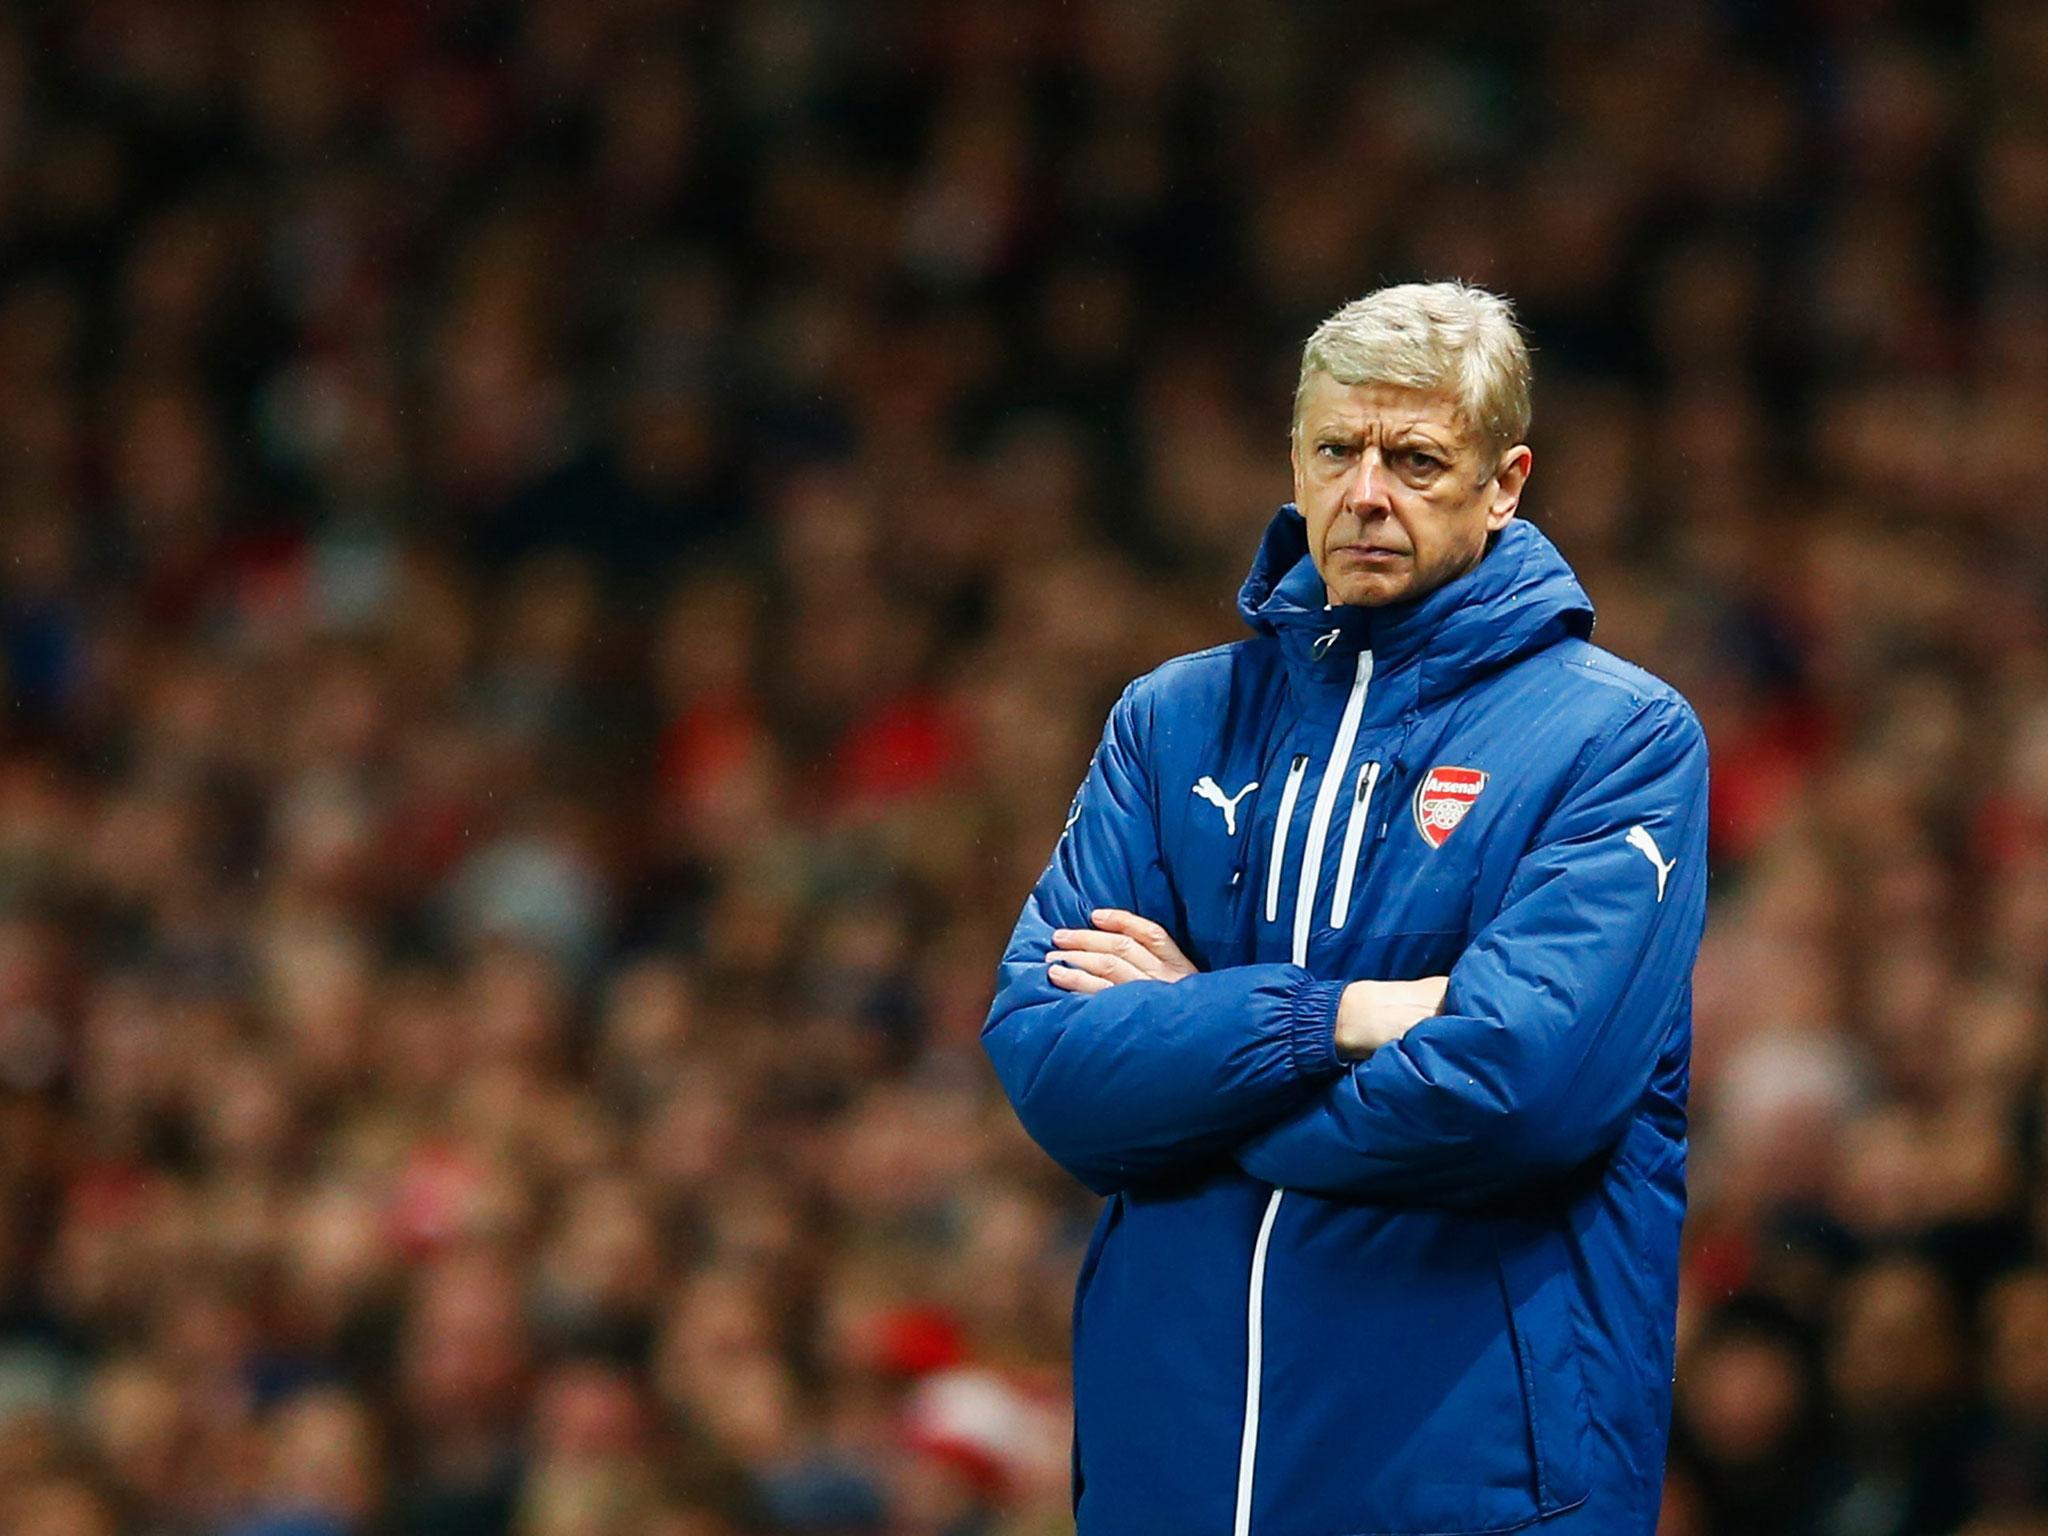 Wenger says he is happy with the current striking options at the club